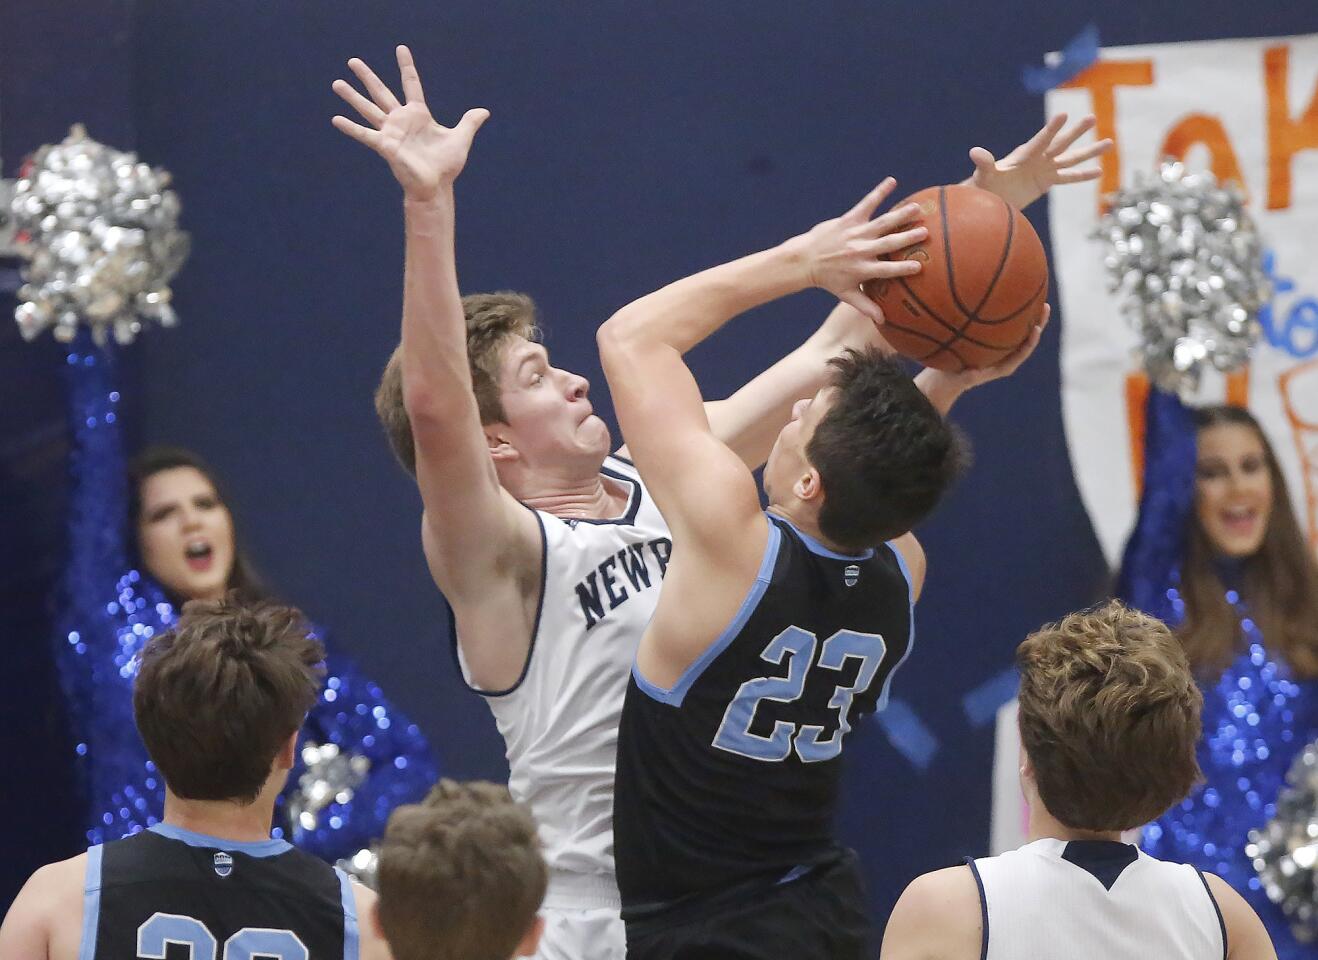 Corona del Mar High's Jack Stone drives into Newport Harbor's Will Harvey in Friday's Surf League road game. Stone had 22 points.